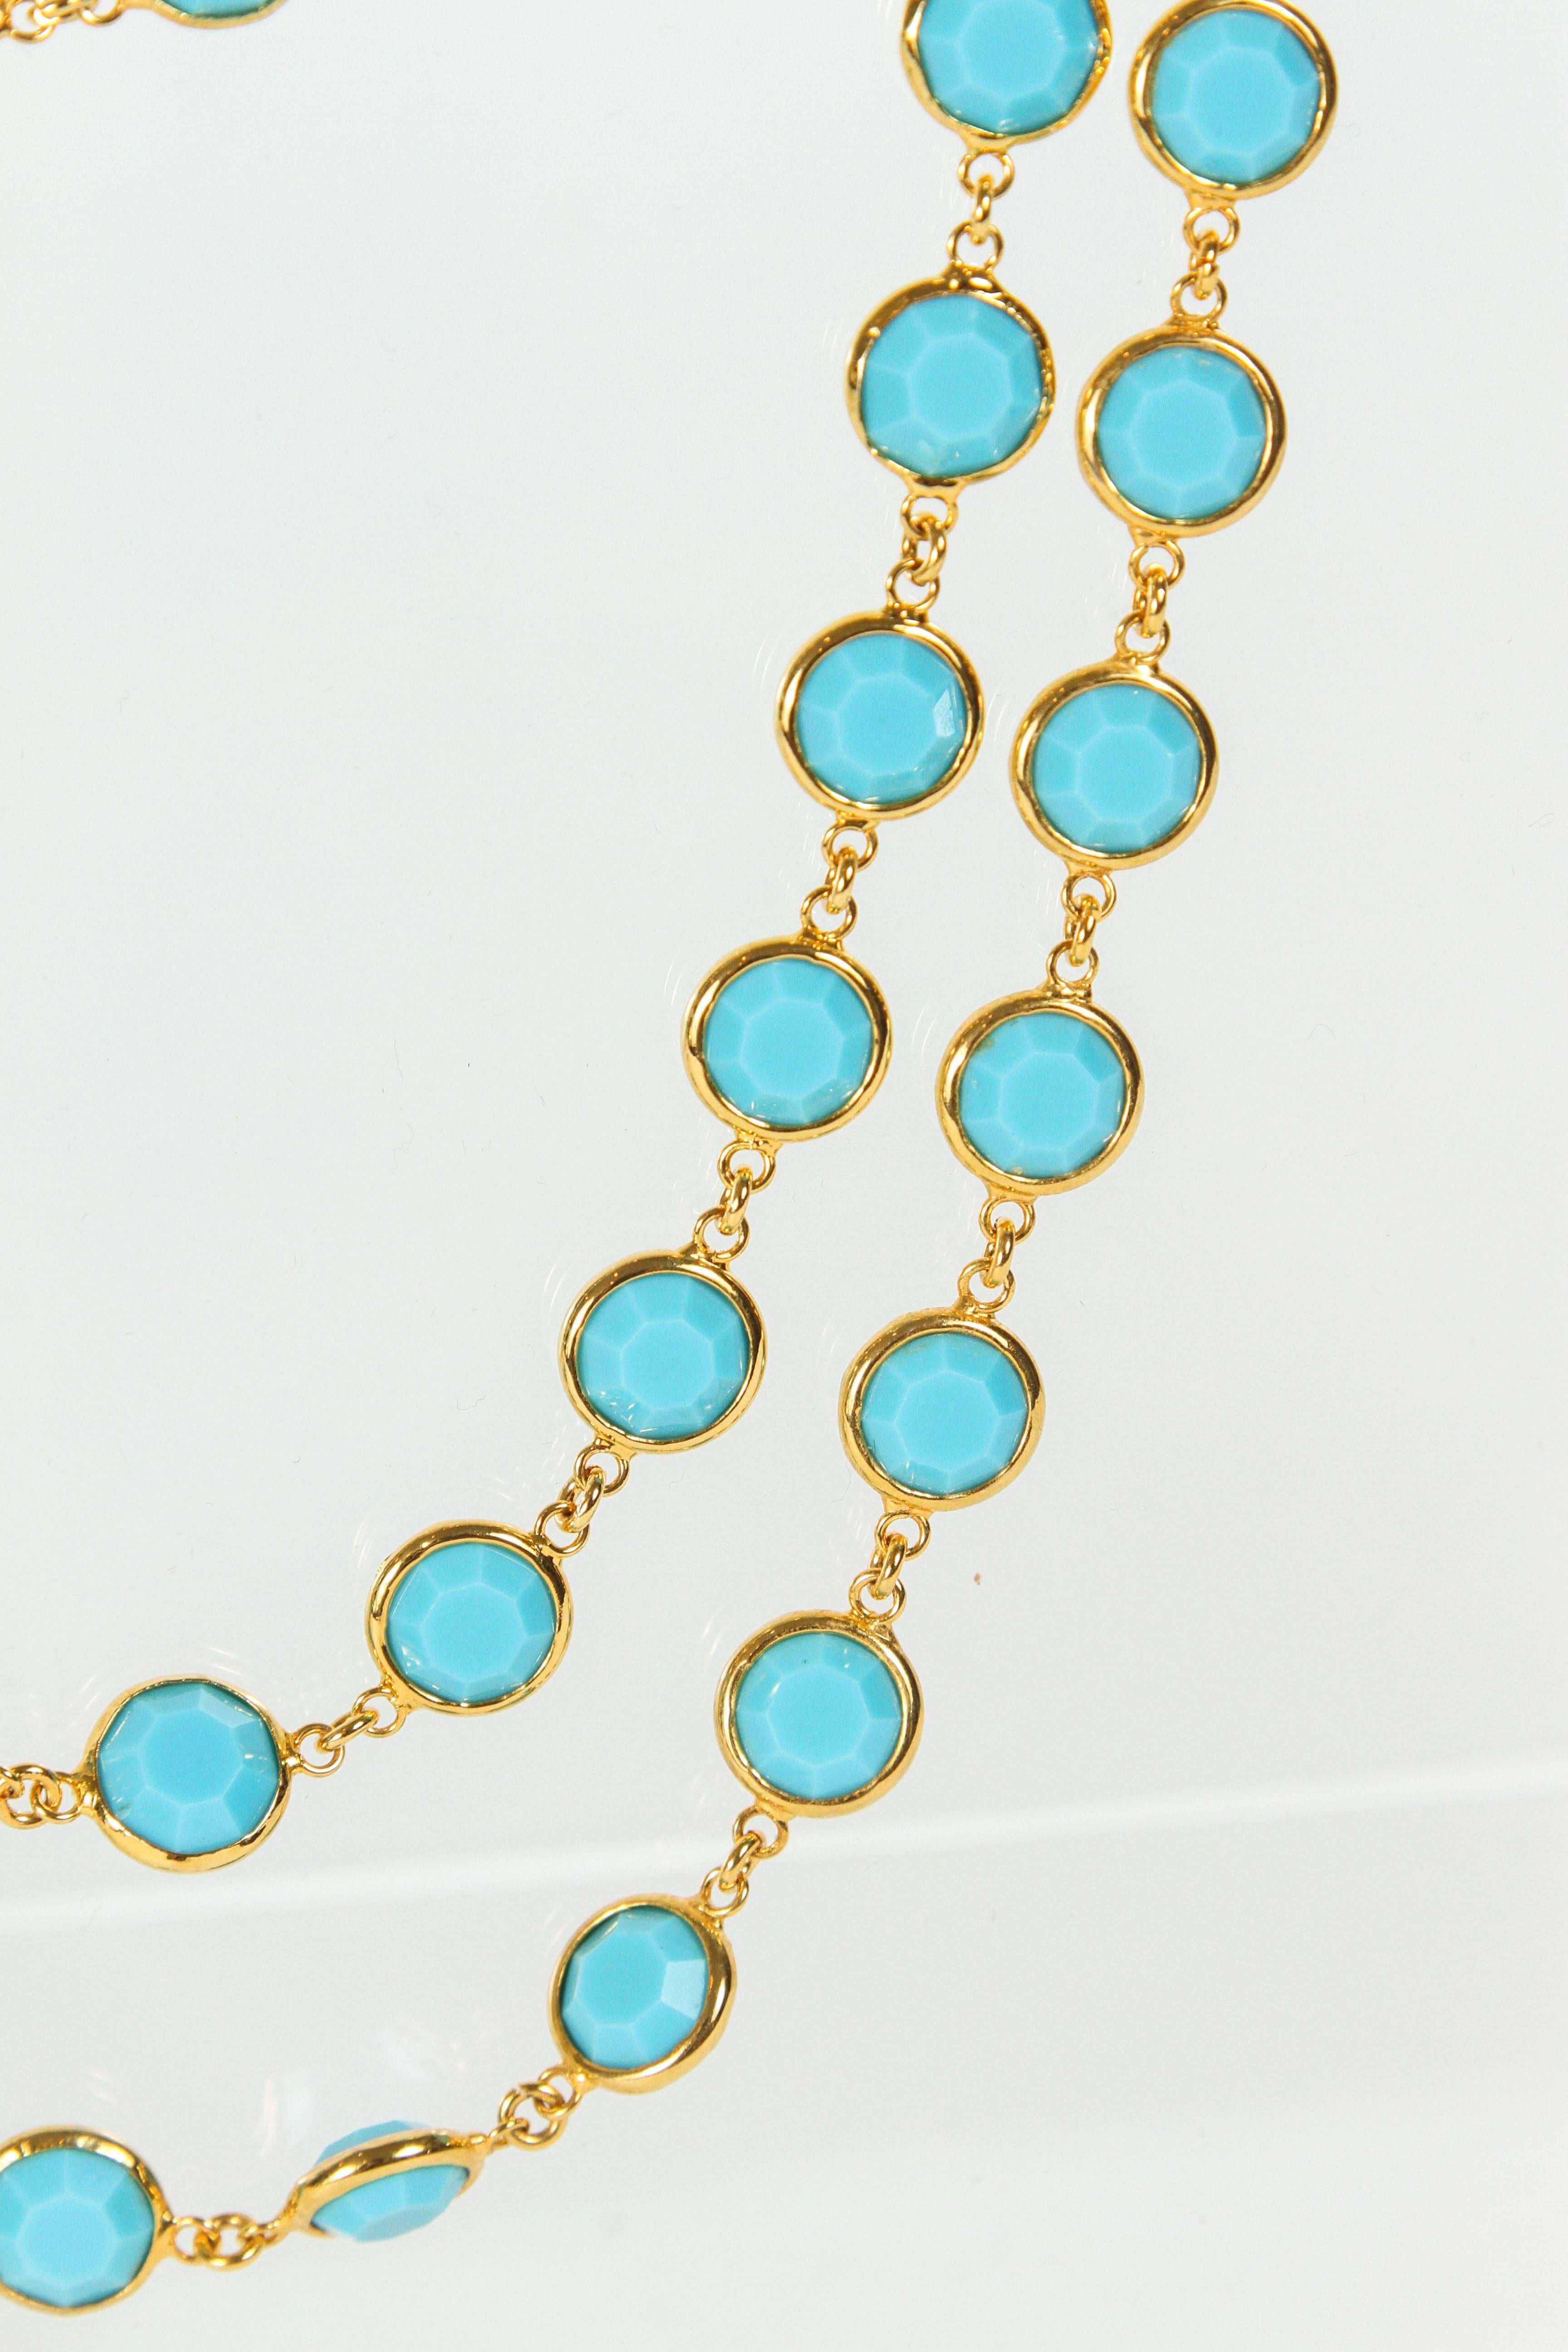 Lovely Chanel suitor with faceted turquoise stones (glass) set in gilt metal bezels. This necklace is in amazing condition. An oval tag is imprinted with 